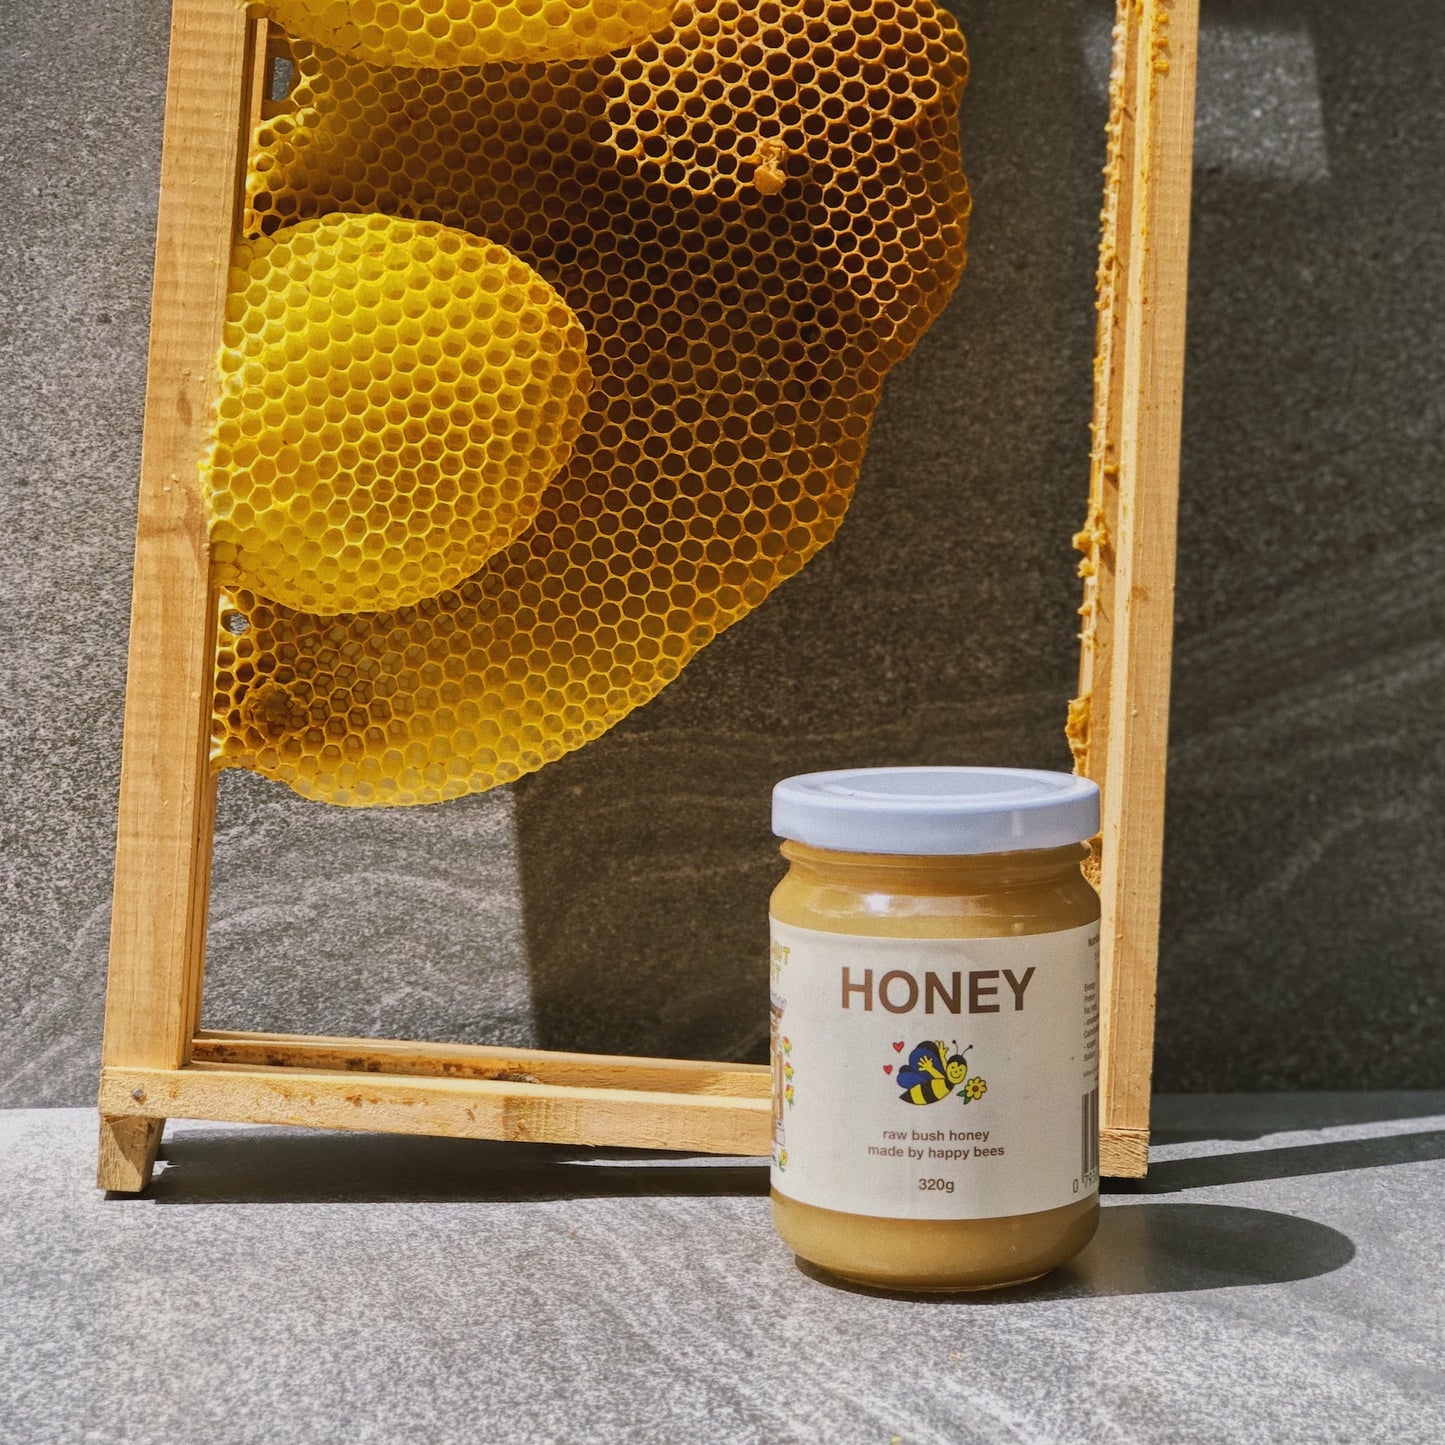  A 320g jar of Friday Hut Market Raw Bush Honey. Frames from a beehive are in the background with golden beeswax honeycomb.